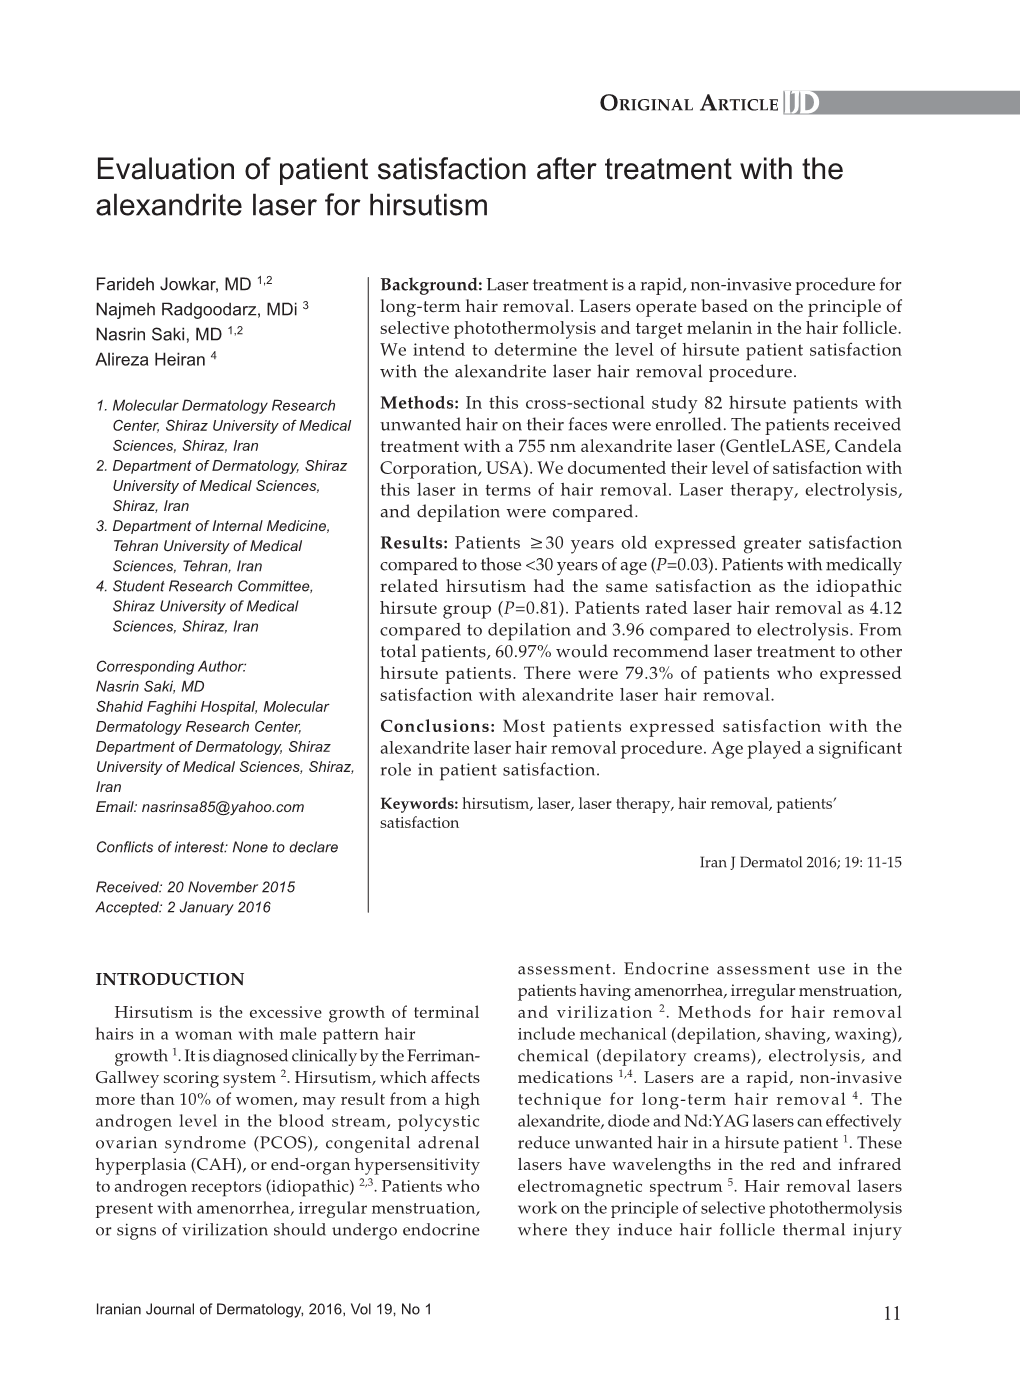 Evaluation of Patient Satisfaction After Treatment with the Alexandrite Laser for Hirsutism